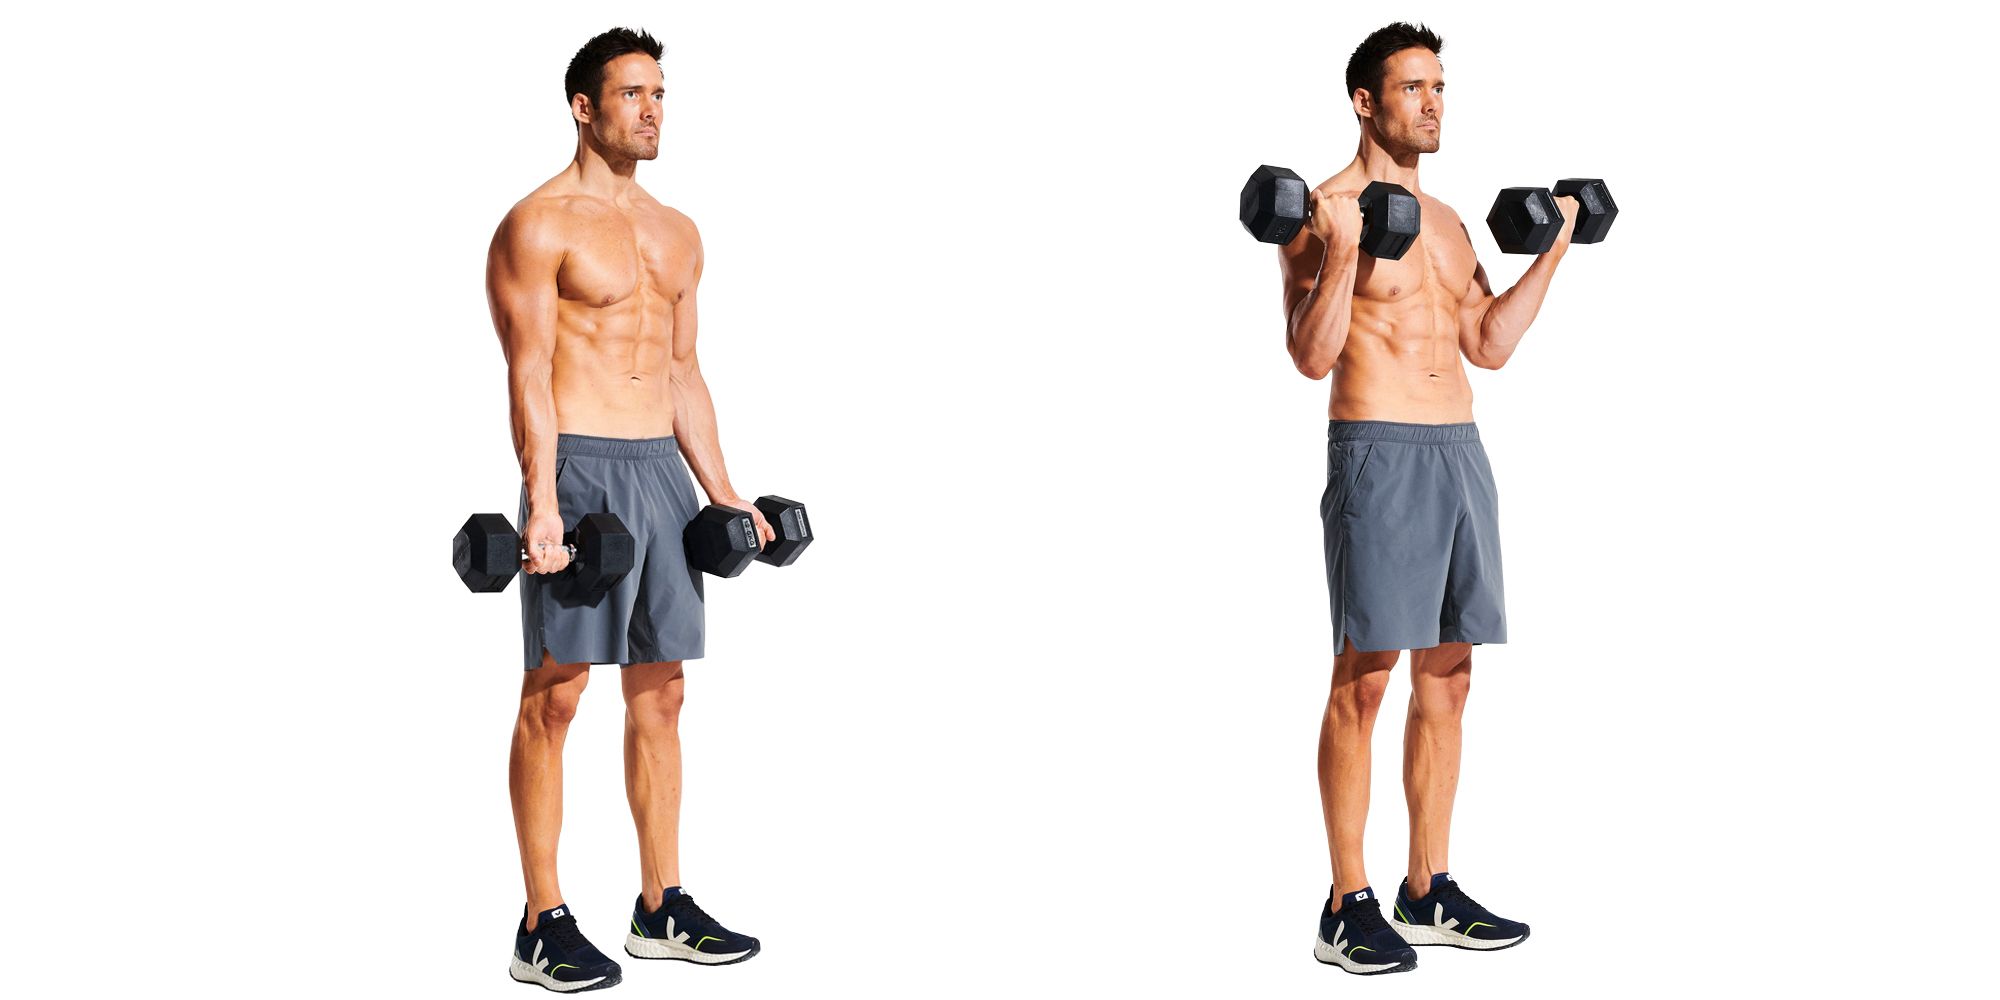 An Arms Workout With Dumbbells to Hit Your Biceps, Triceps and Shoulders